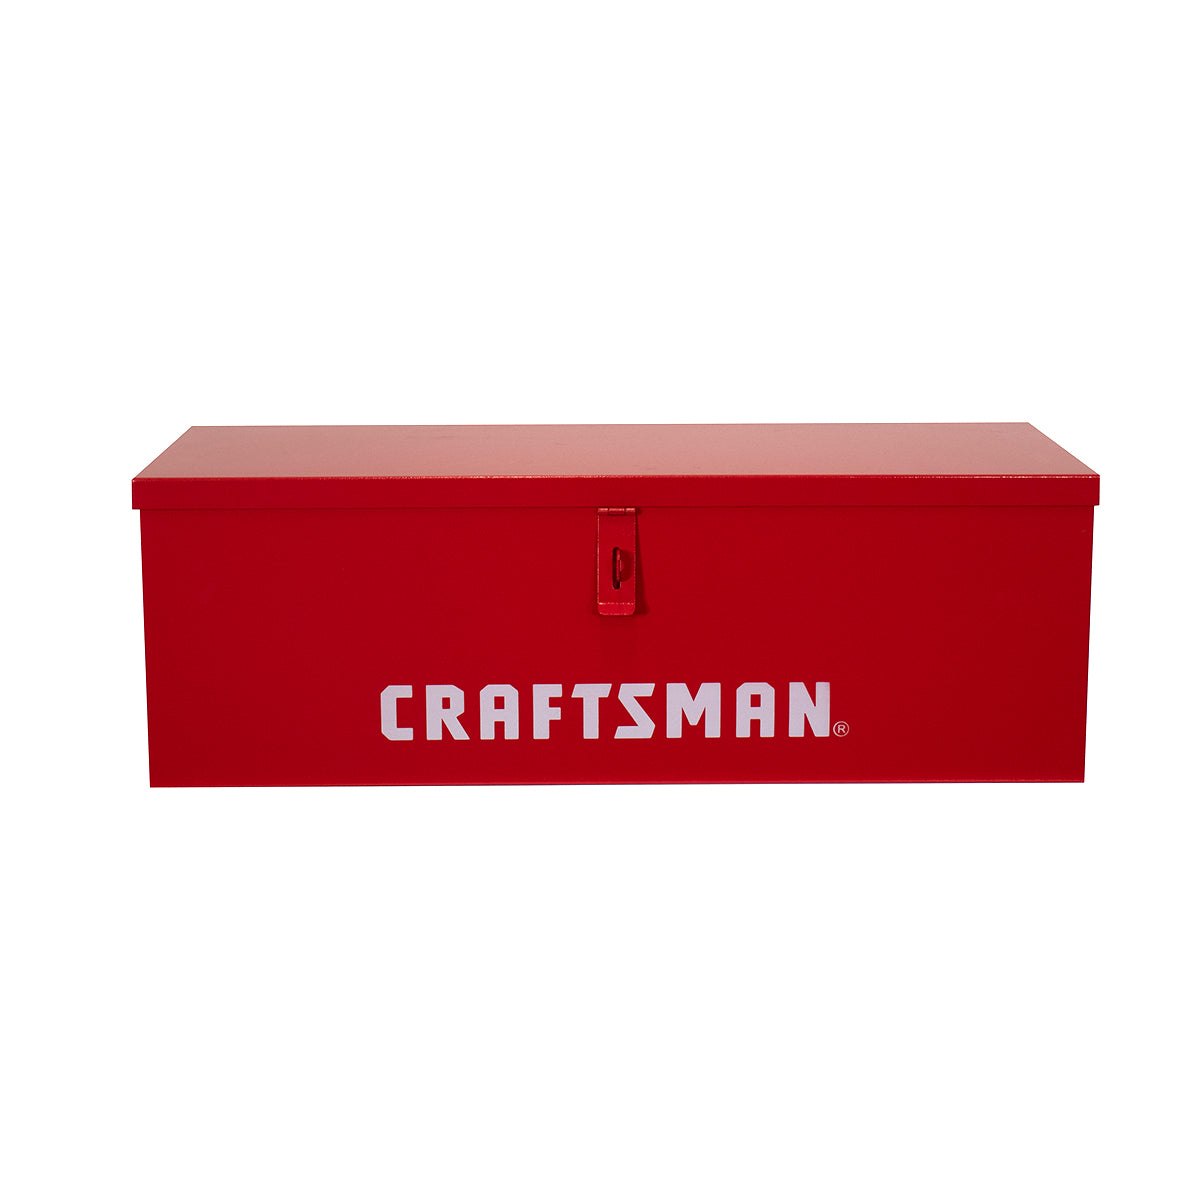 30 Craftsman Utility Box in Red